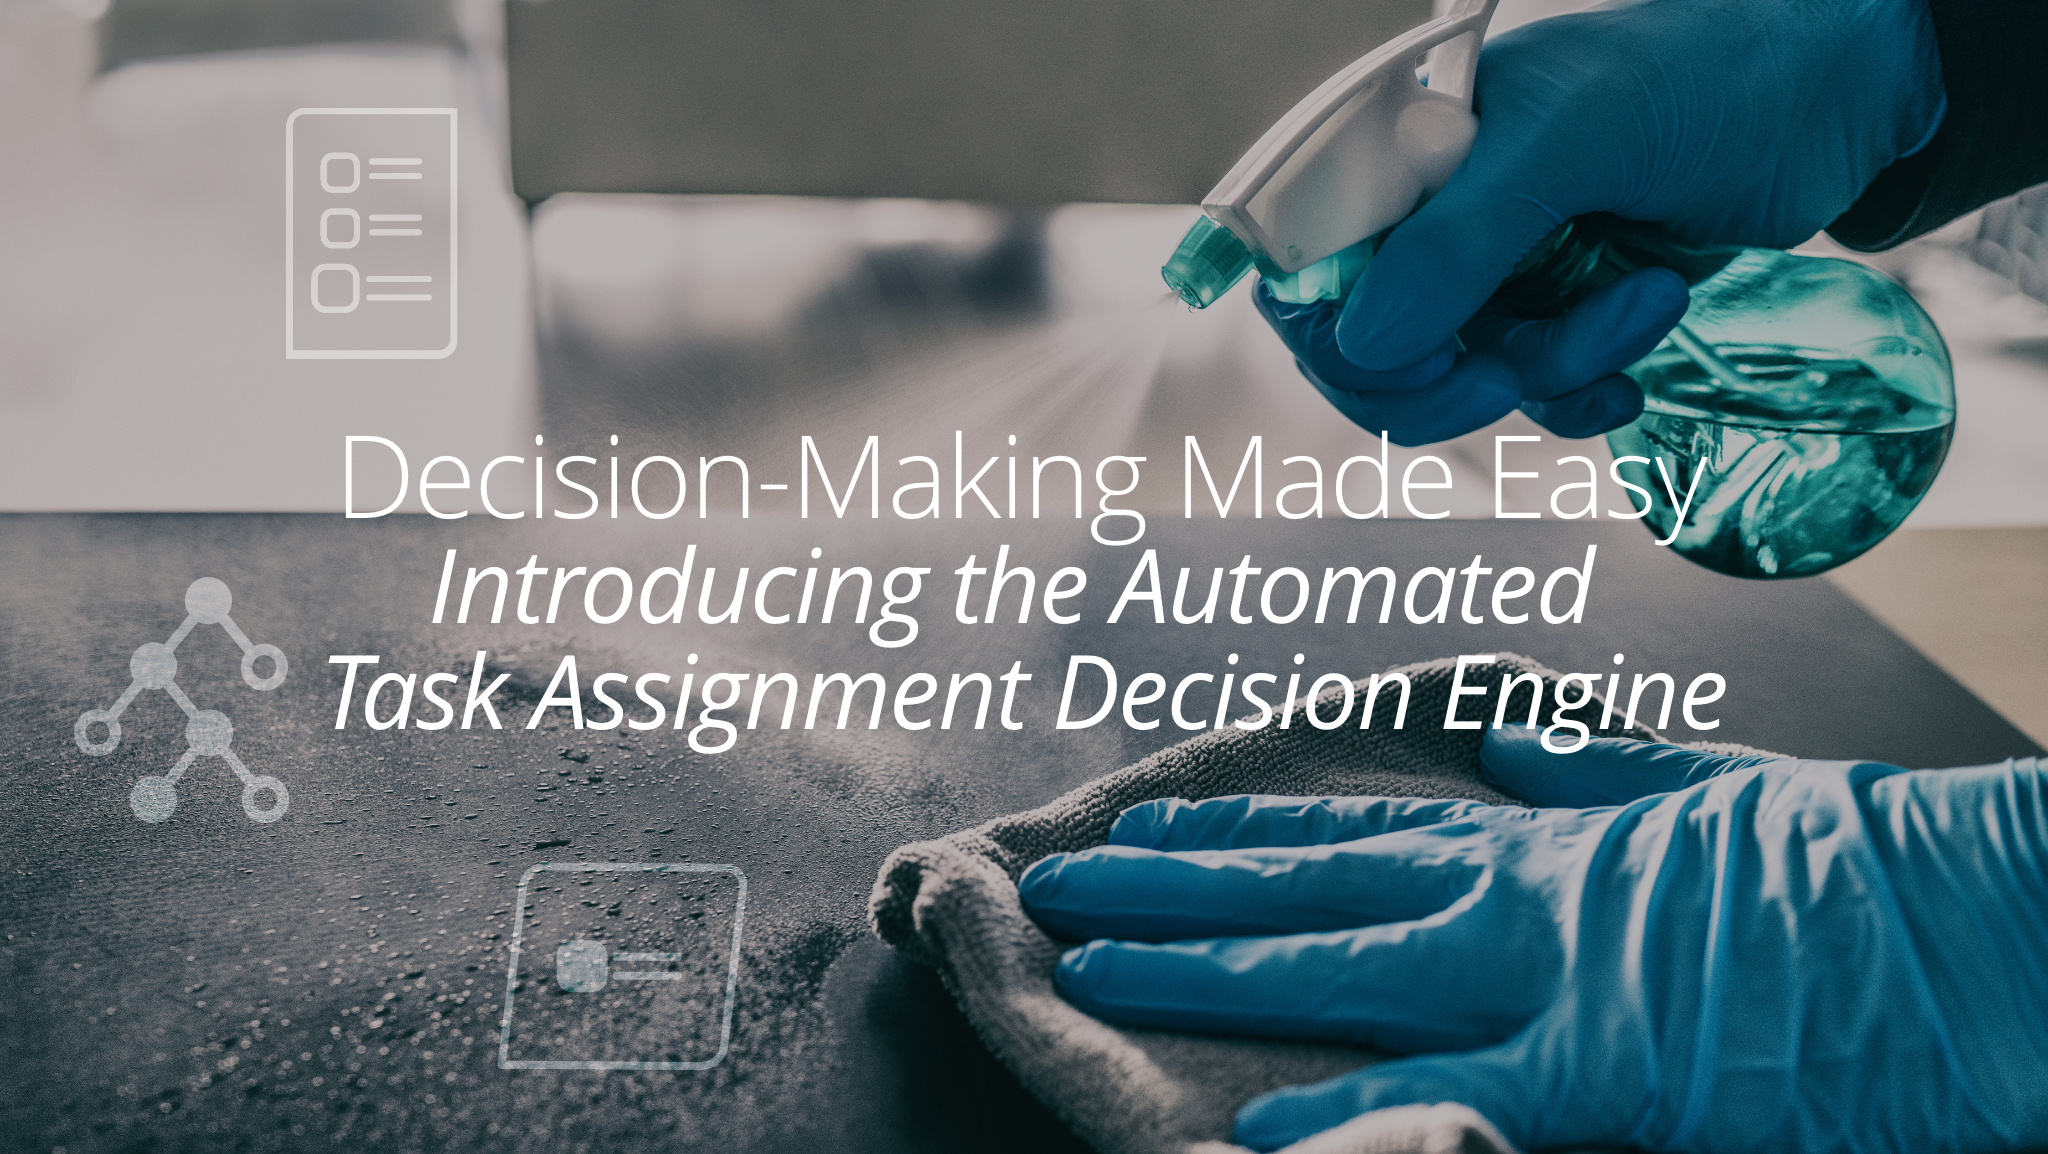 Decision-Making Made Easy: Introducing the Automated Task Assignment Decision Engine